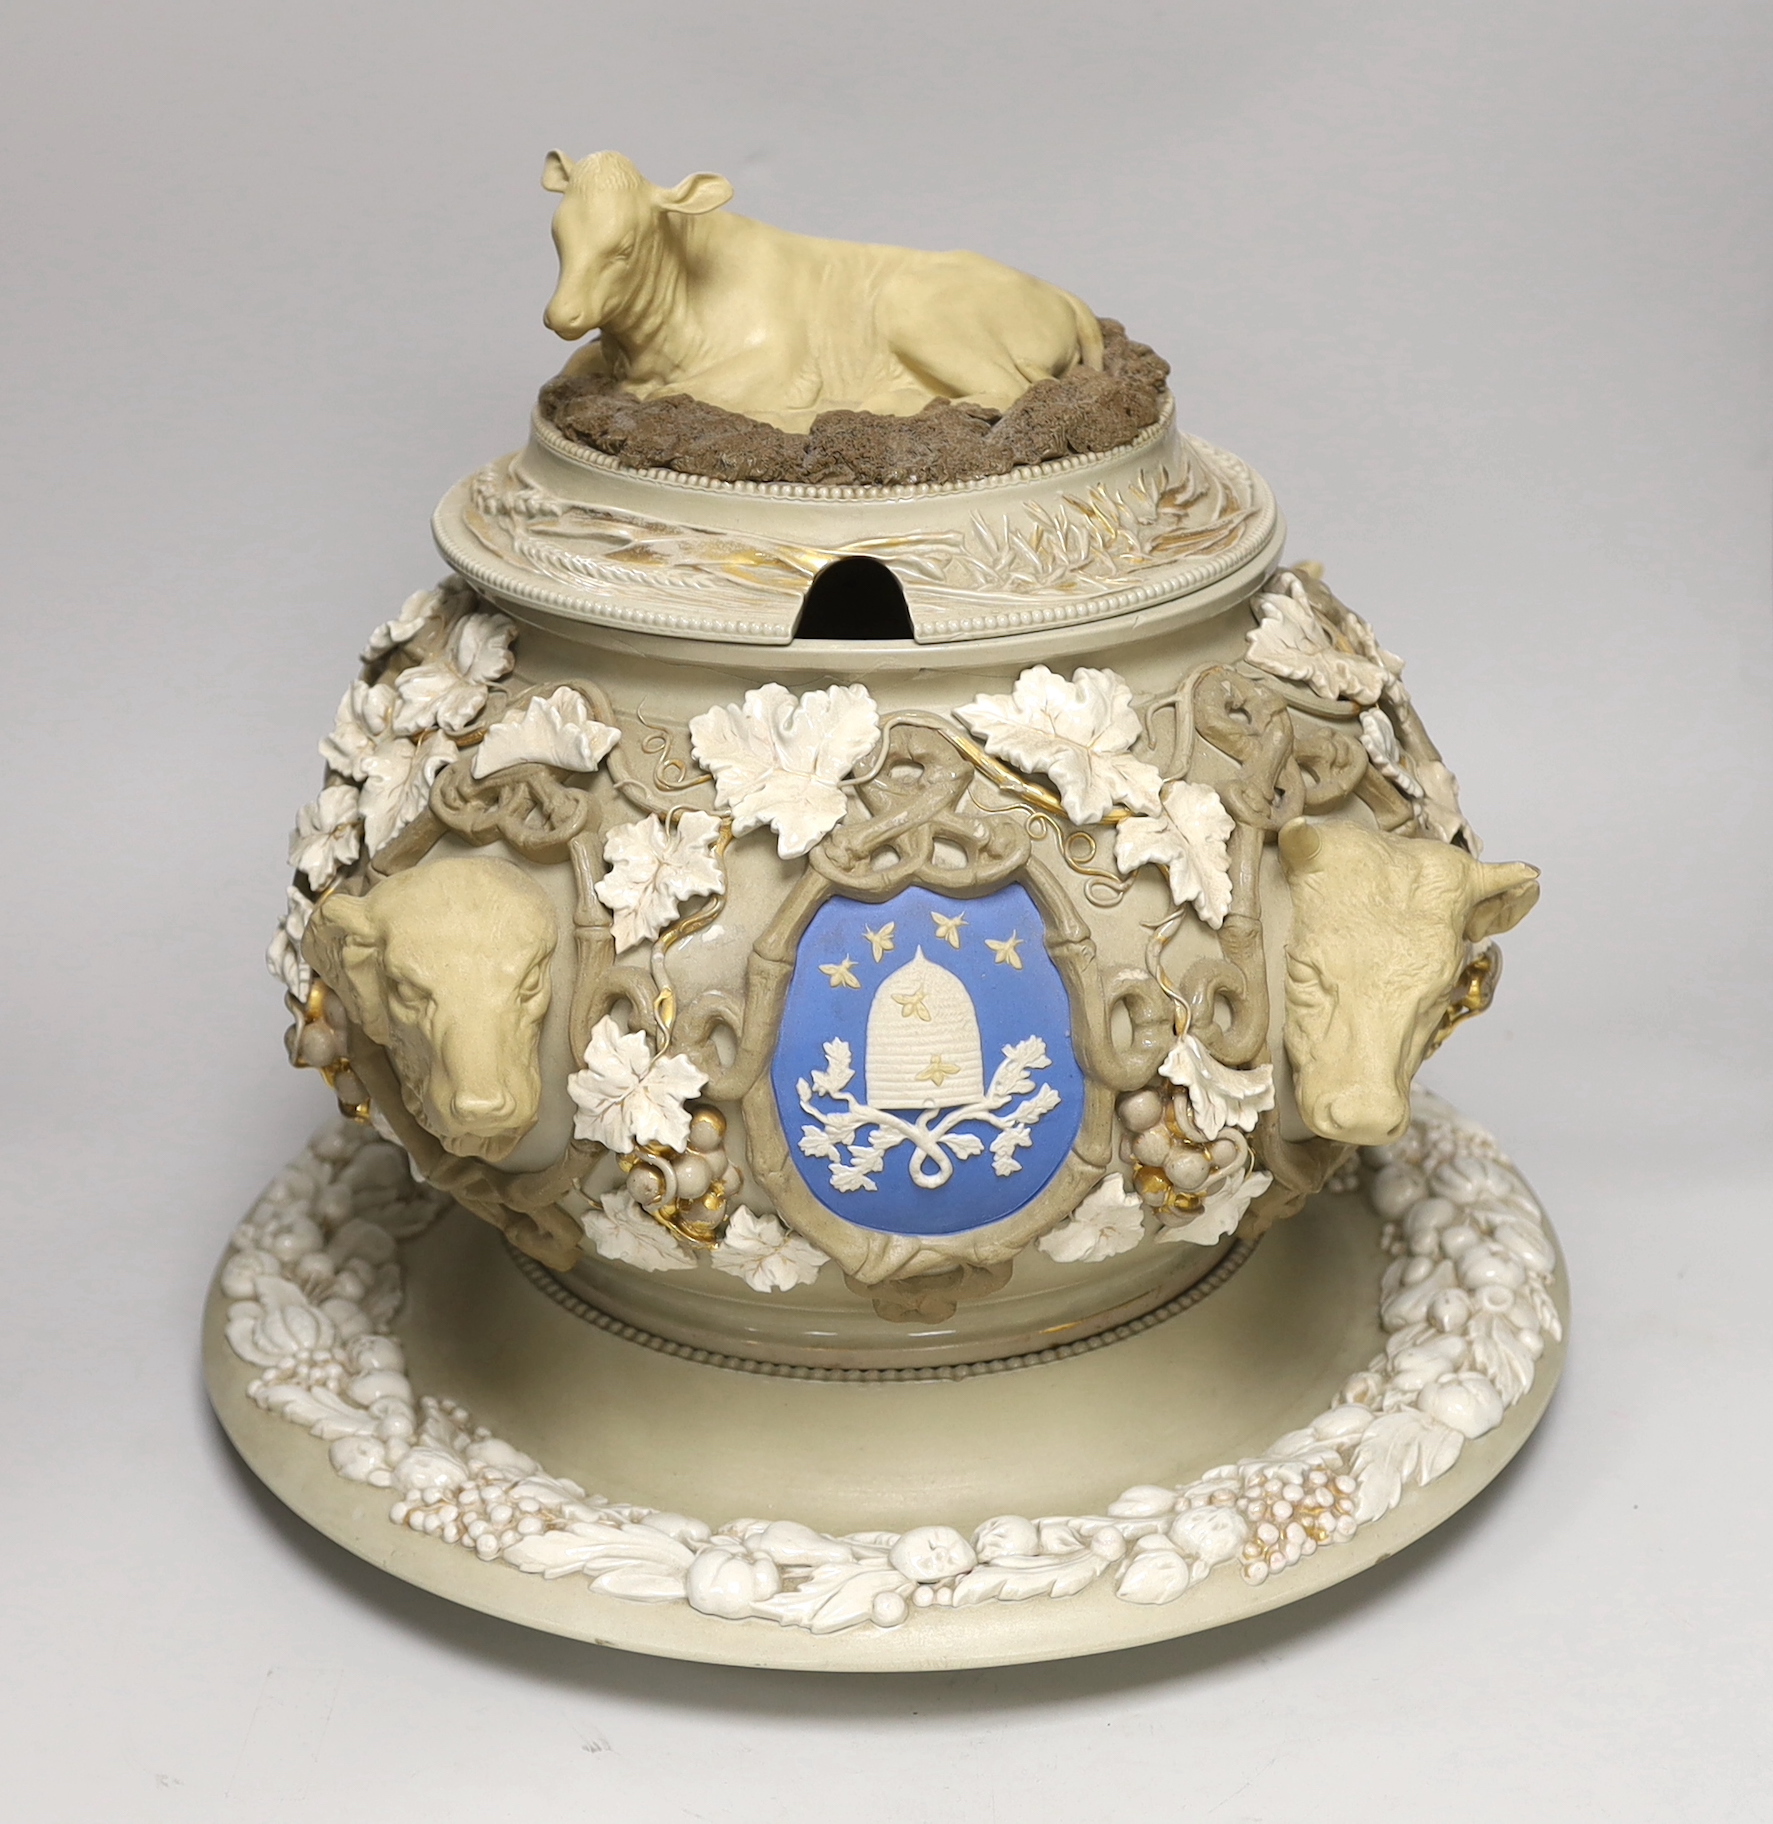 An impressive English cane ware and drab ware ‘agriculture’ soup tureen, cover and stand with cover, modelled with cattle, a dog and a horse’s head, amongst twining vines and crests, 38cm high